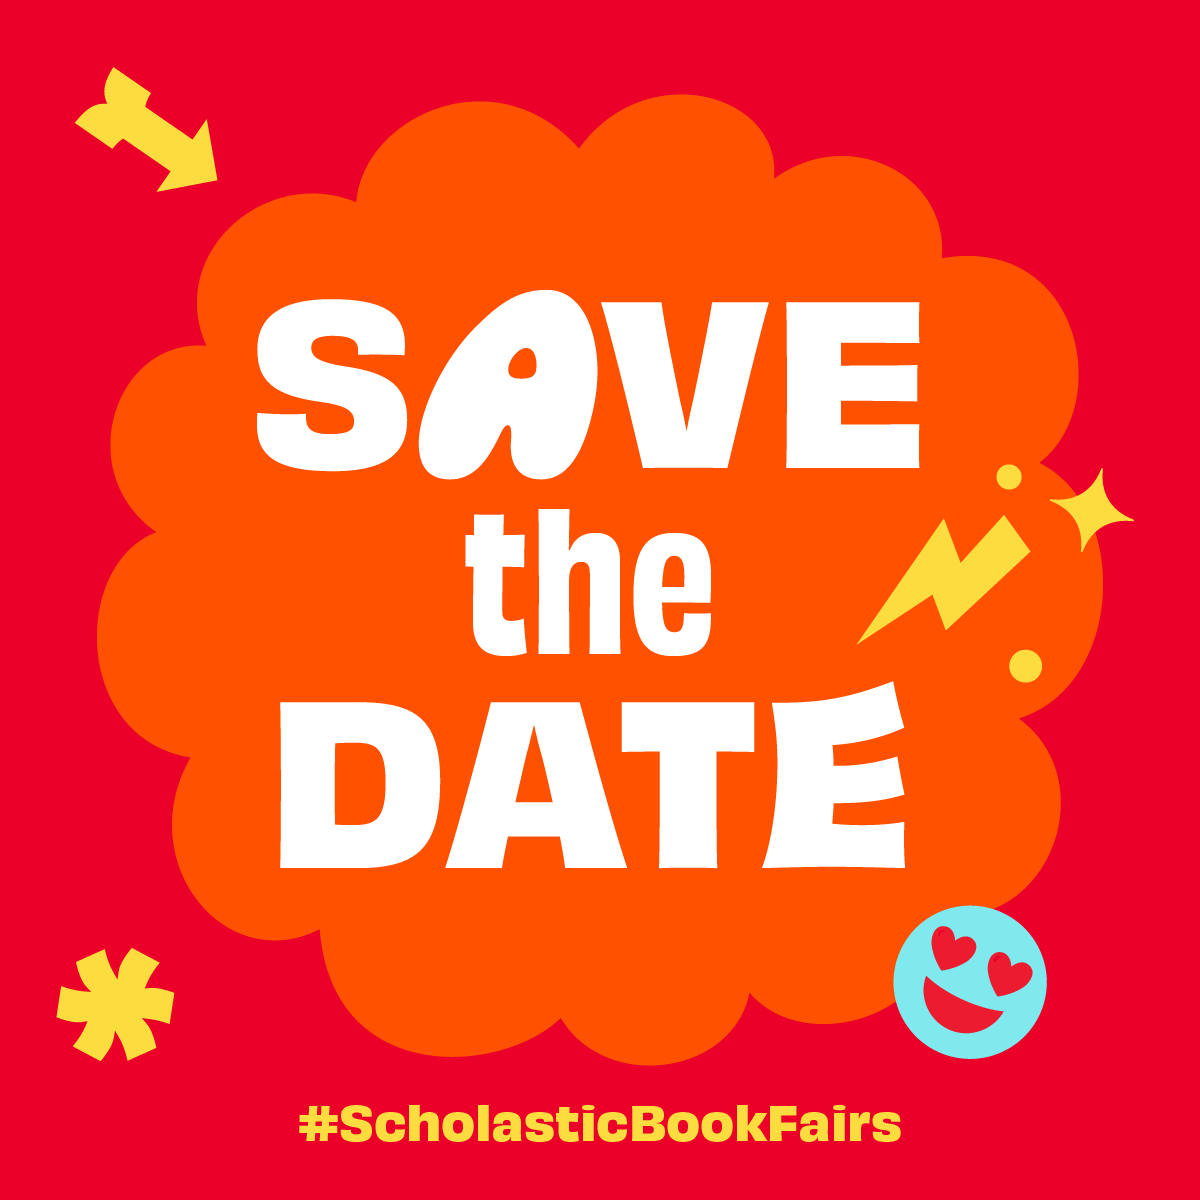 Book Fair is COMING SOON! Save the date! When: October 16-20 Where: McKendree Media Center